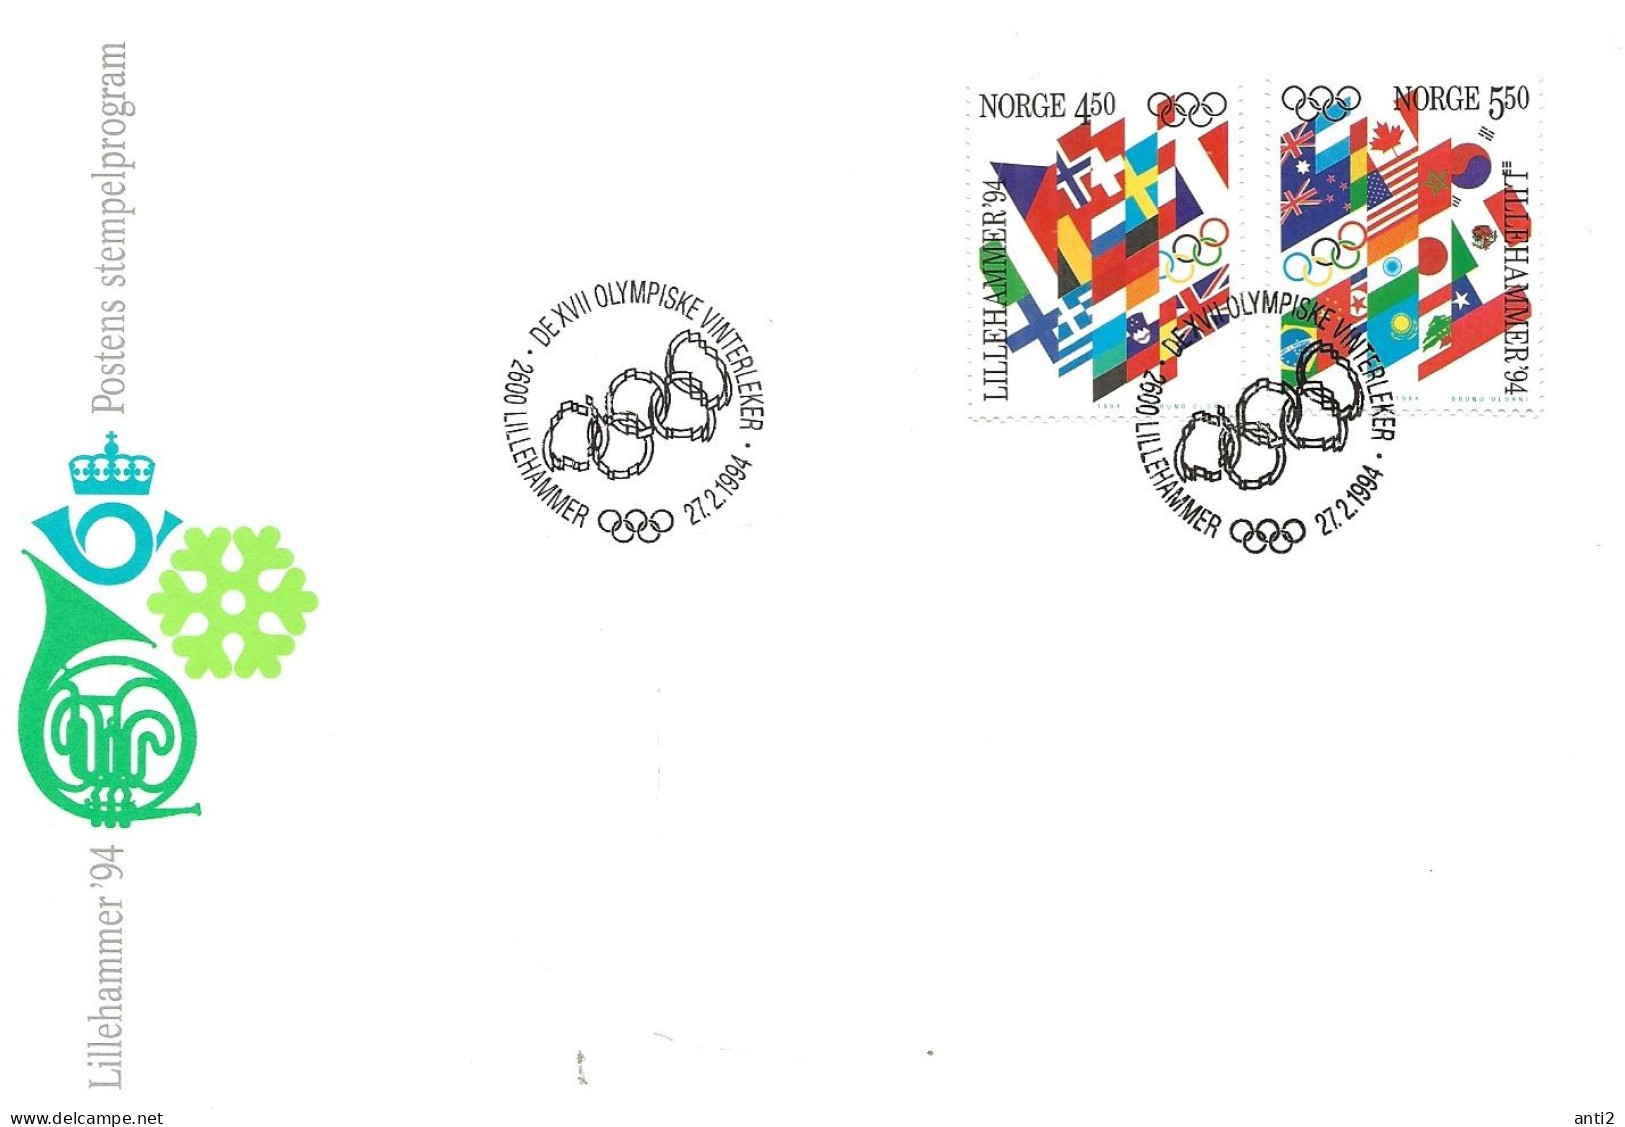 Norway Norge 1994 Olympic Winter Games Lillehammer 1994, Flags Mi 1145-1146 Cover Cancelled 7.2.1994 - Briefe U. Dokumente